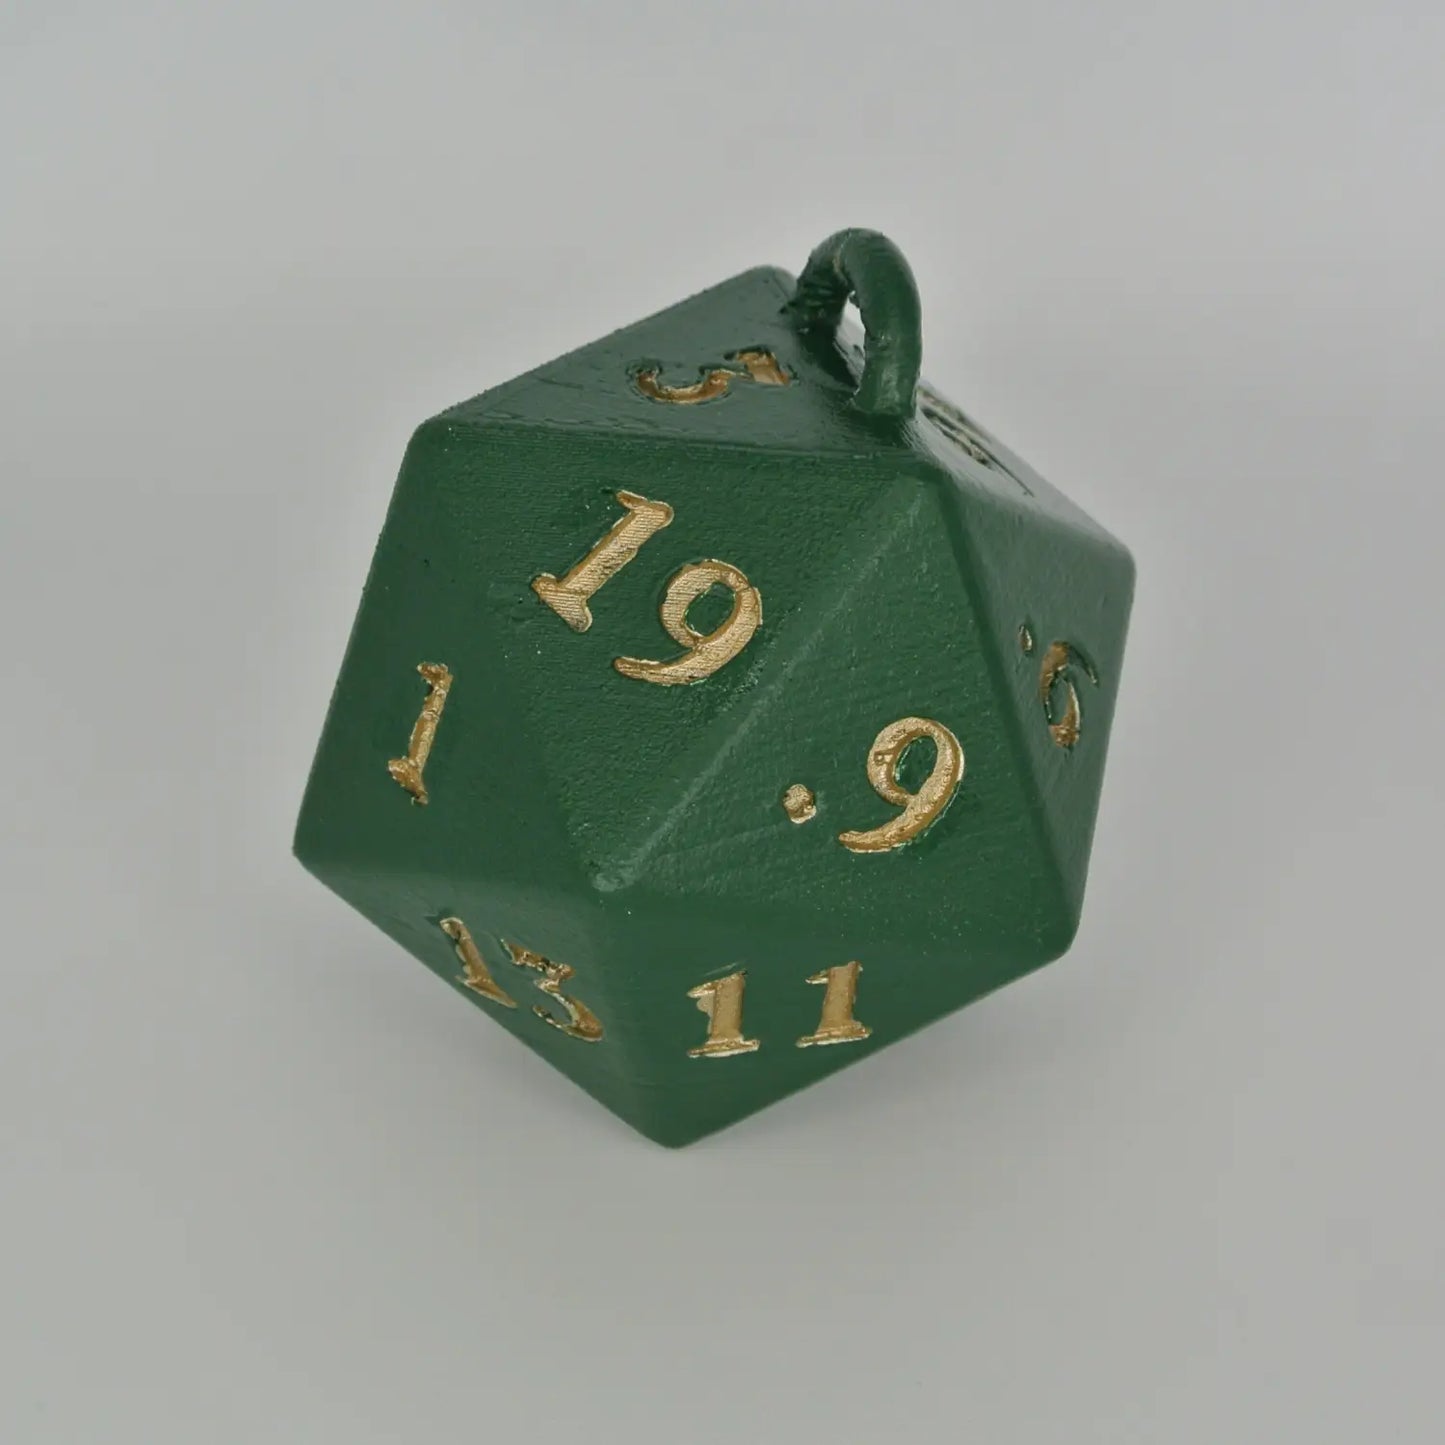 20 sided dice Christmas Ornament - Green/Gold - Ornaments